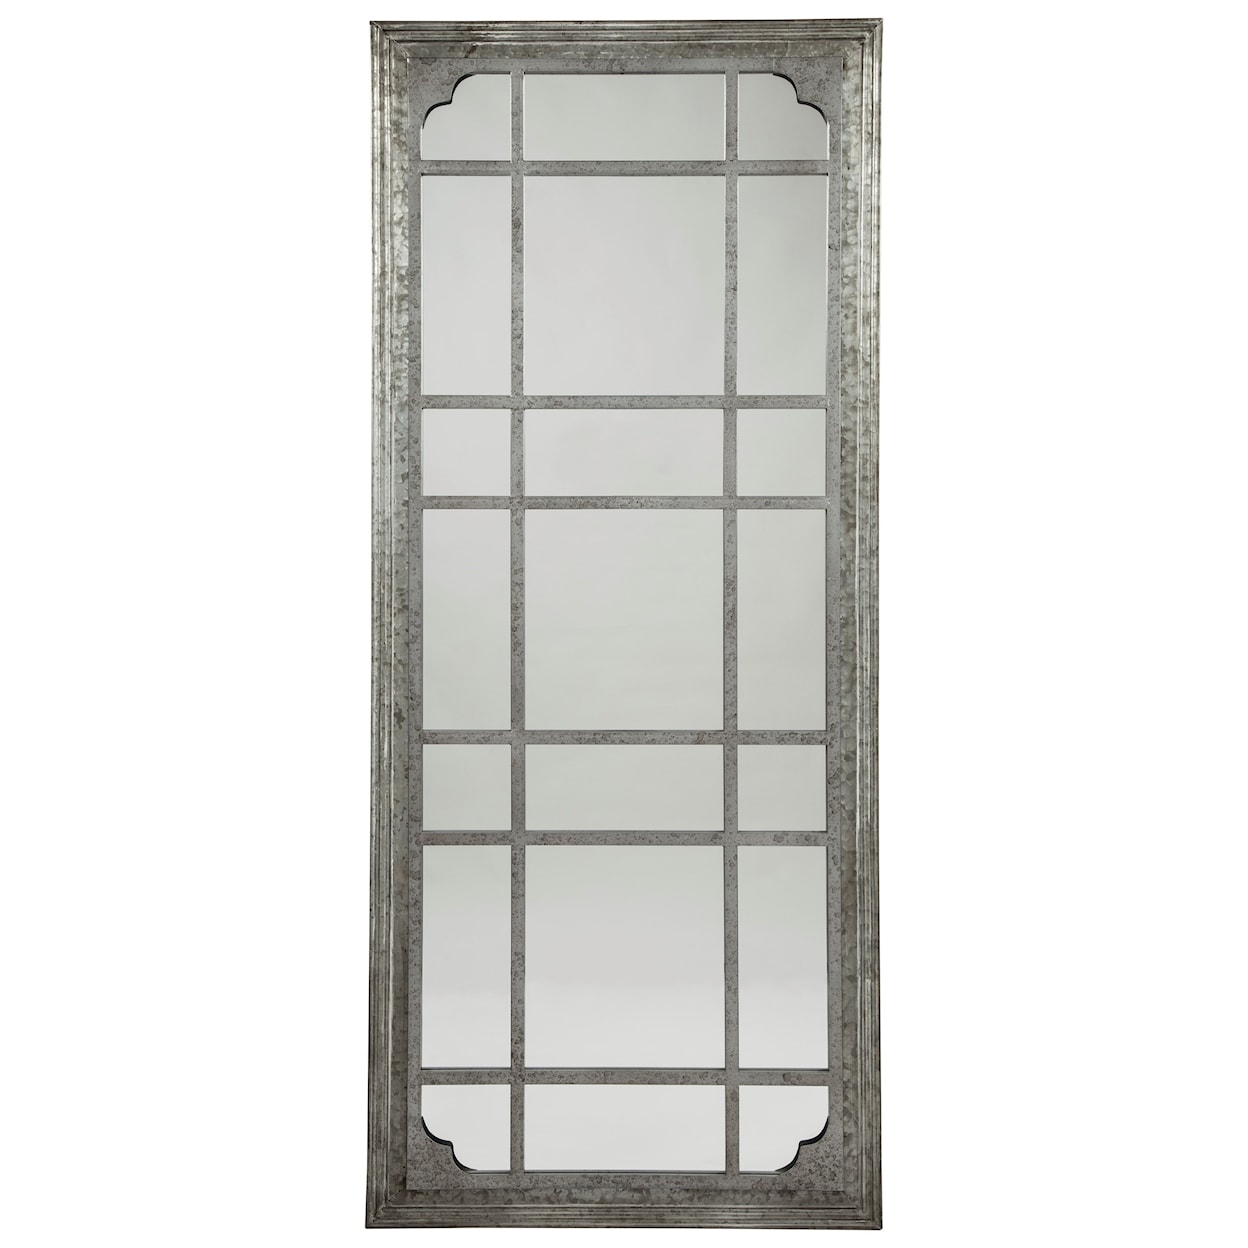 Benchcraft Accent Mirrors Remy Antique Gray Accent Mirror